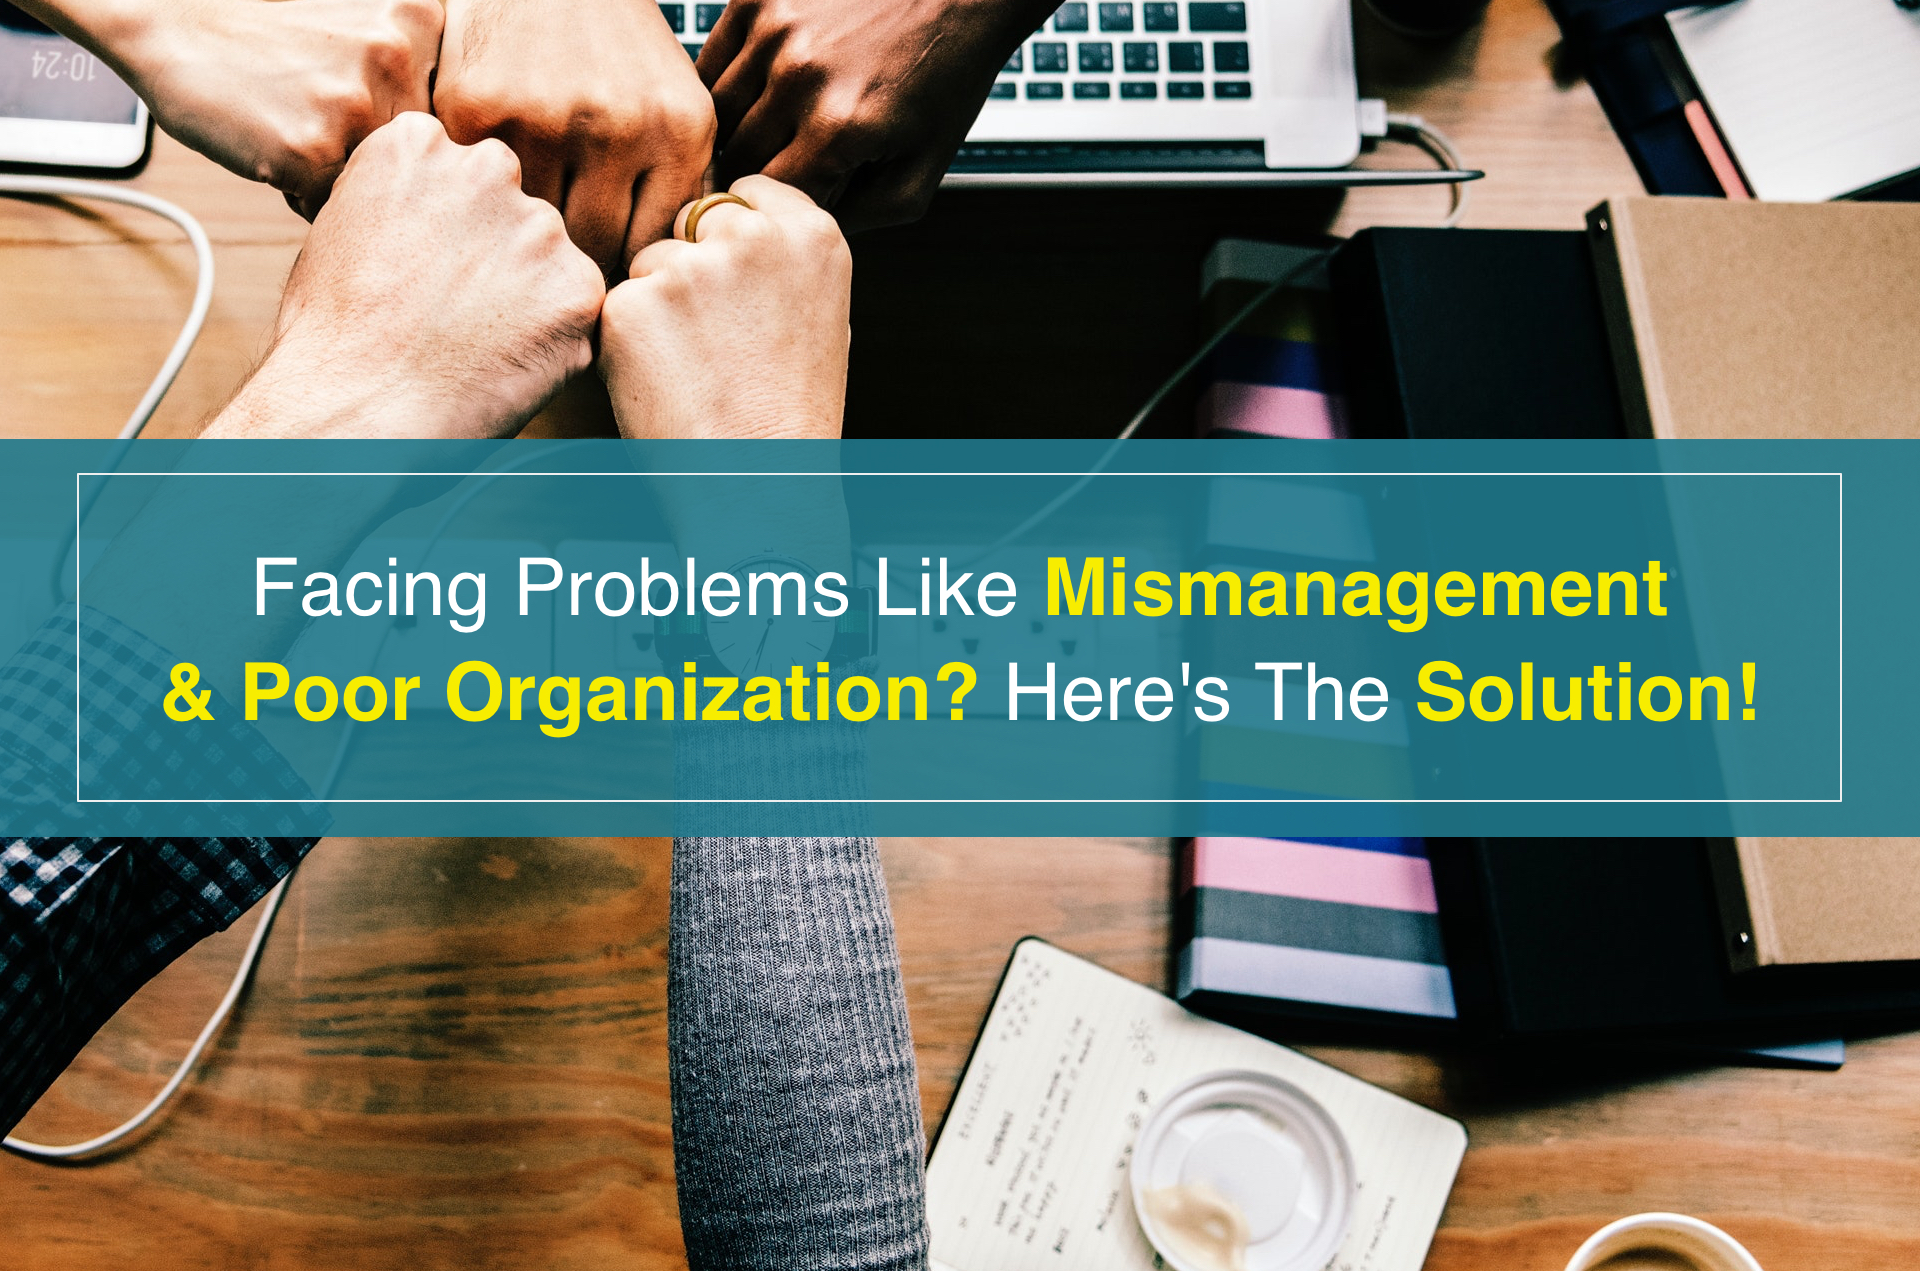 How to avoid mismanagement and its disastrous effects